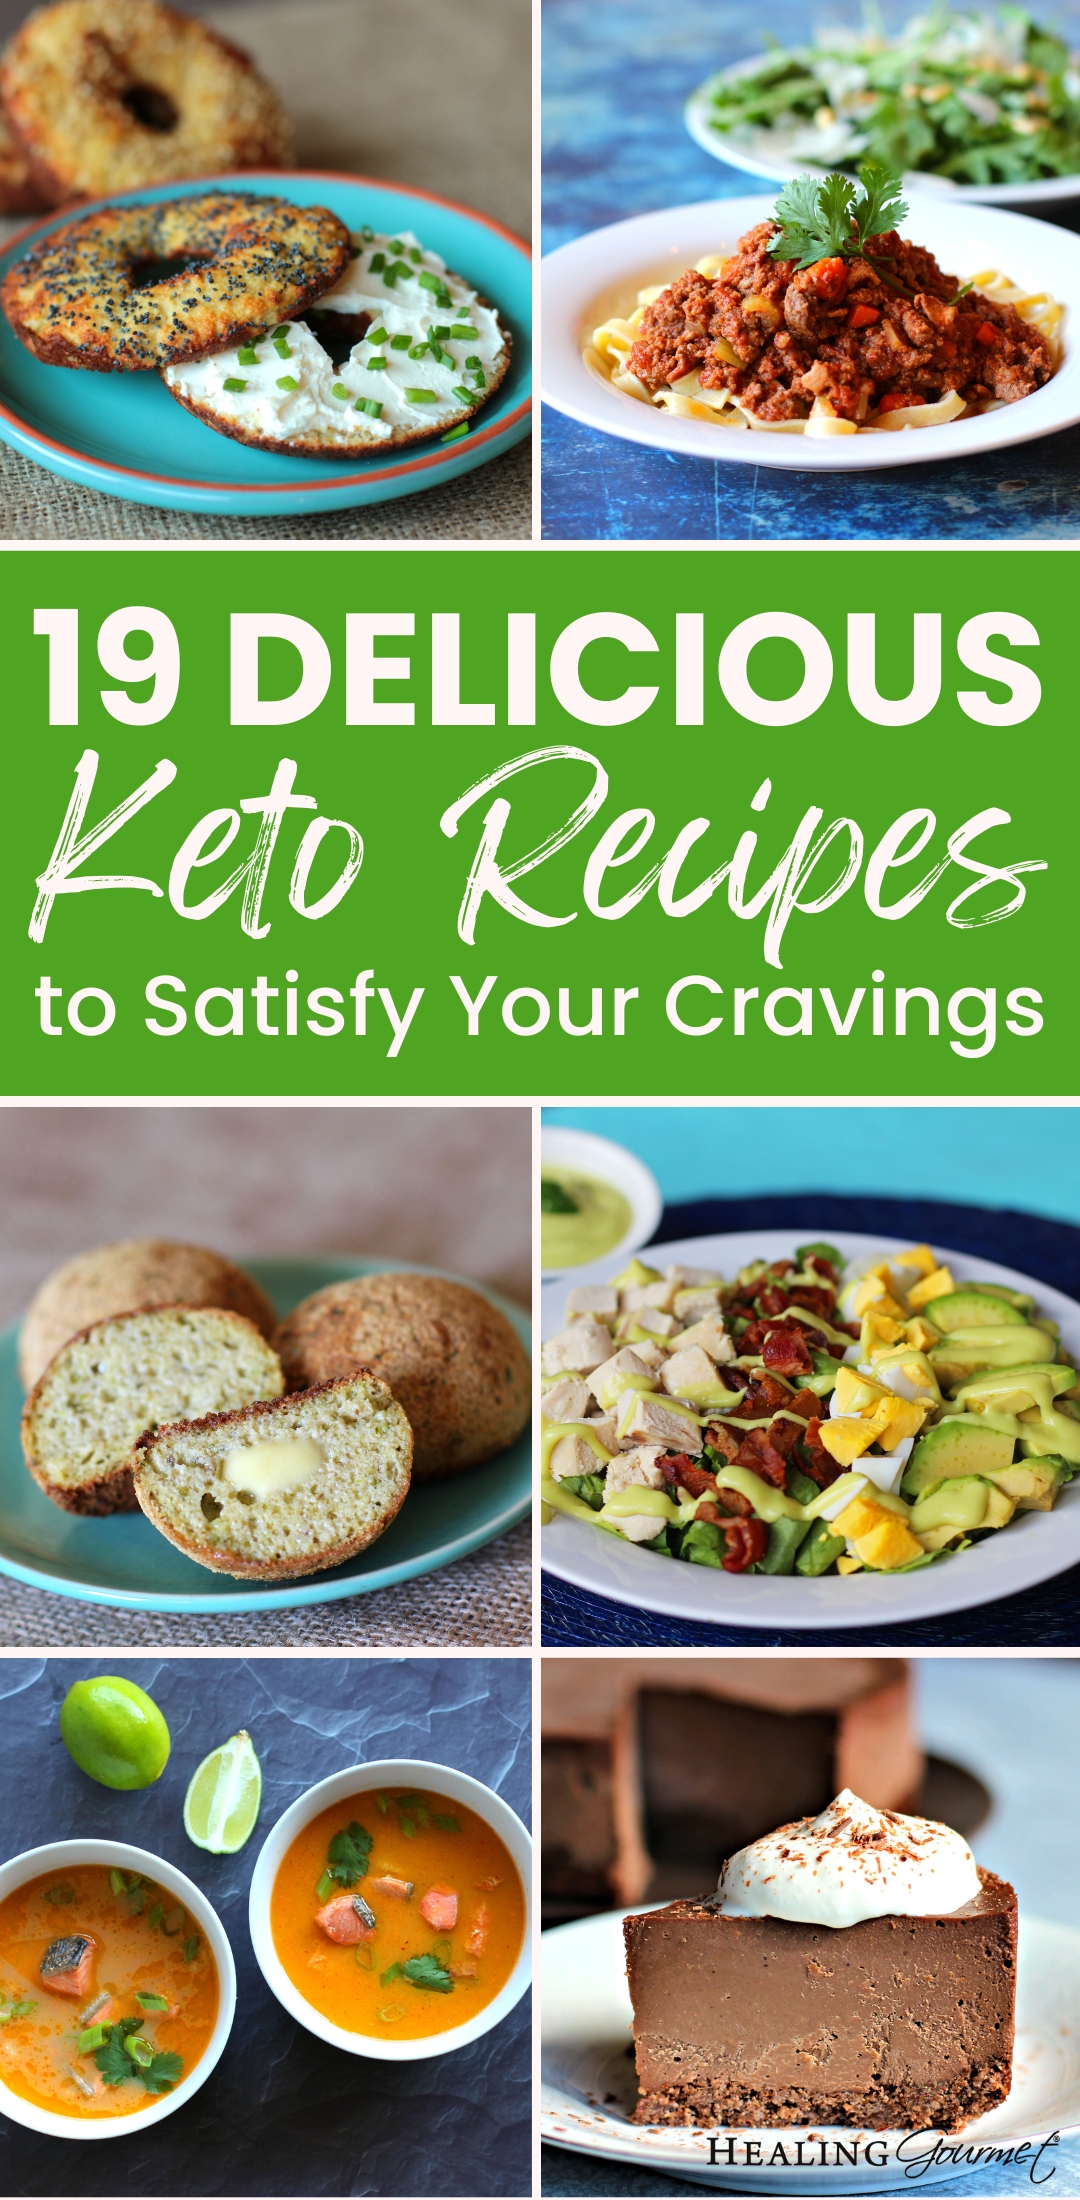 19 Delicious Keto Recipes to Satisfy Your Cravings: From Soups to Desserts